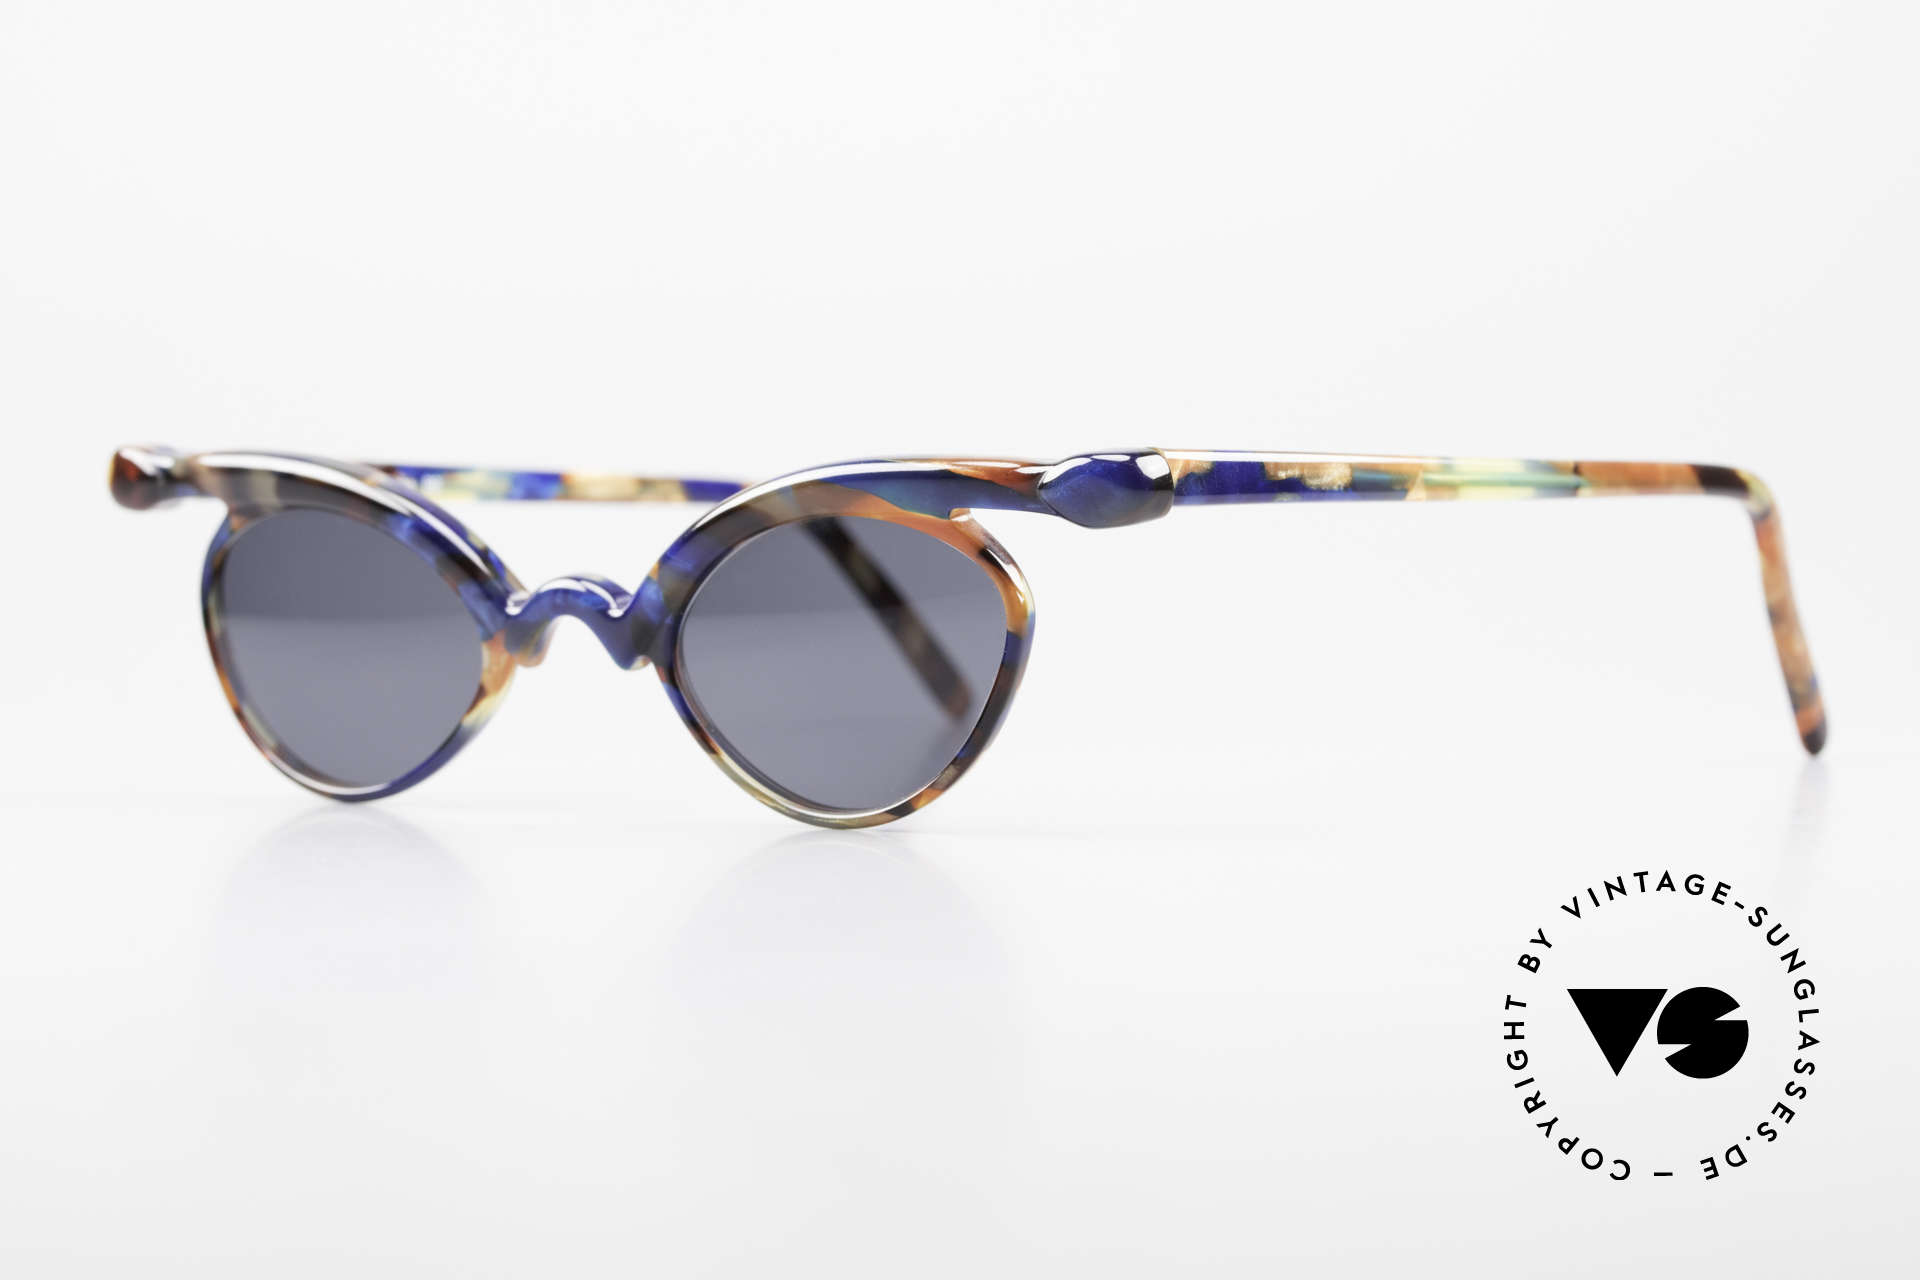 Design Maske Berlin Niobe Artful 90's Ladies Sunglasses, functional and EYE-CATCHING, at the same time, Made for Women